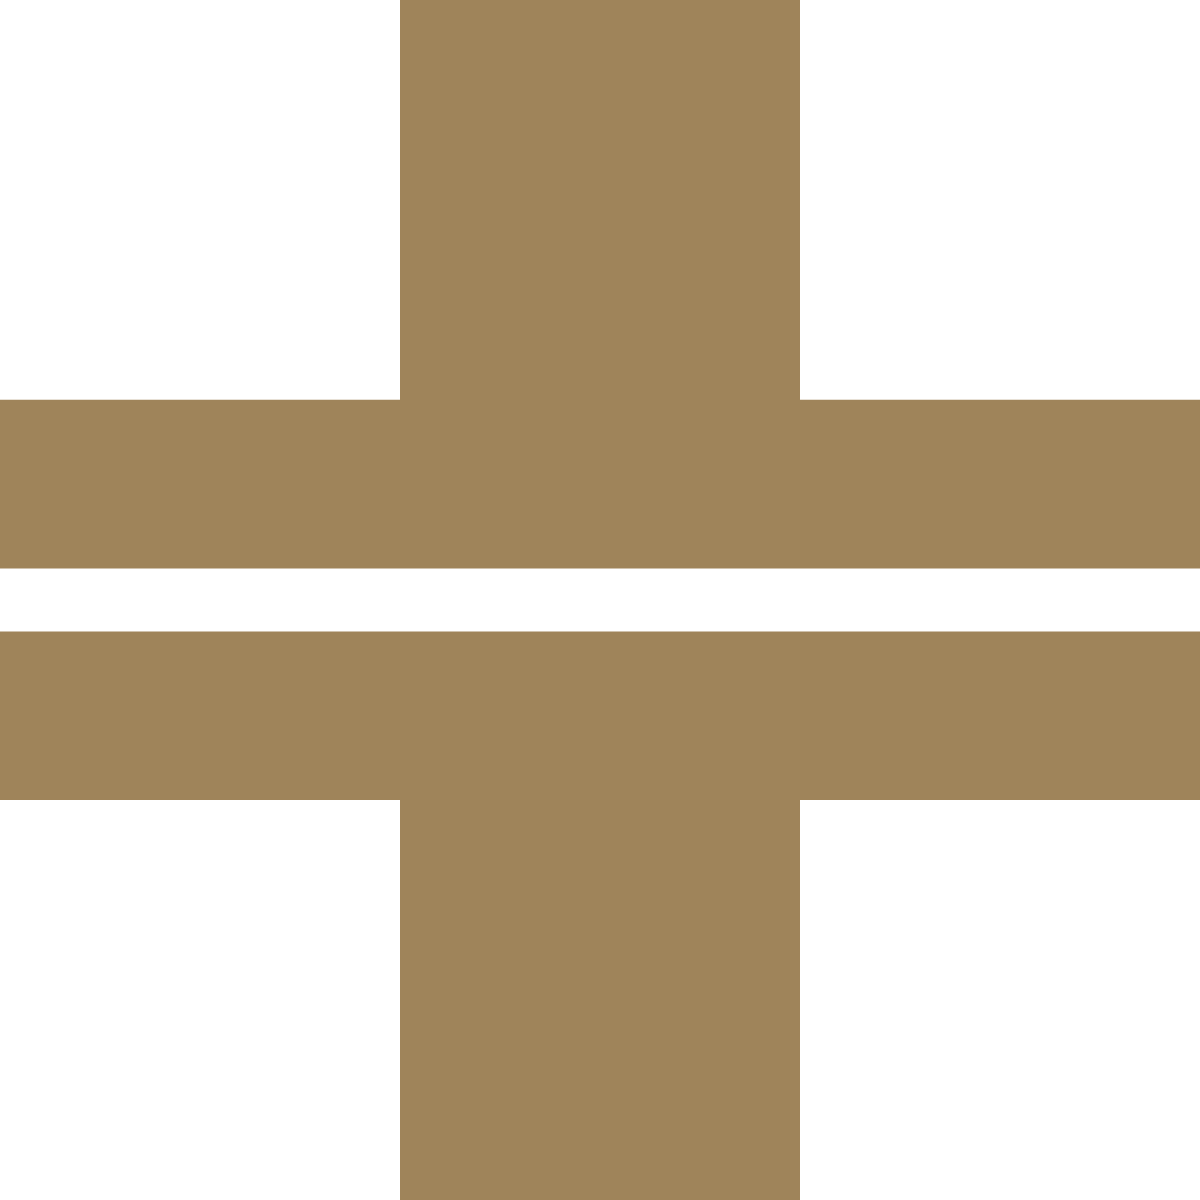 A brown cross with a white line in the middle on a white background.